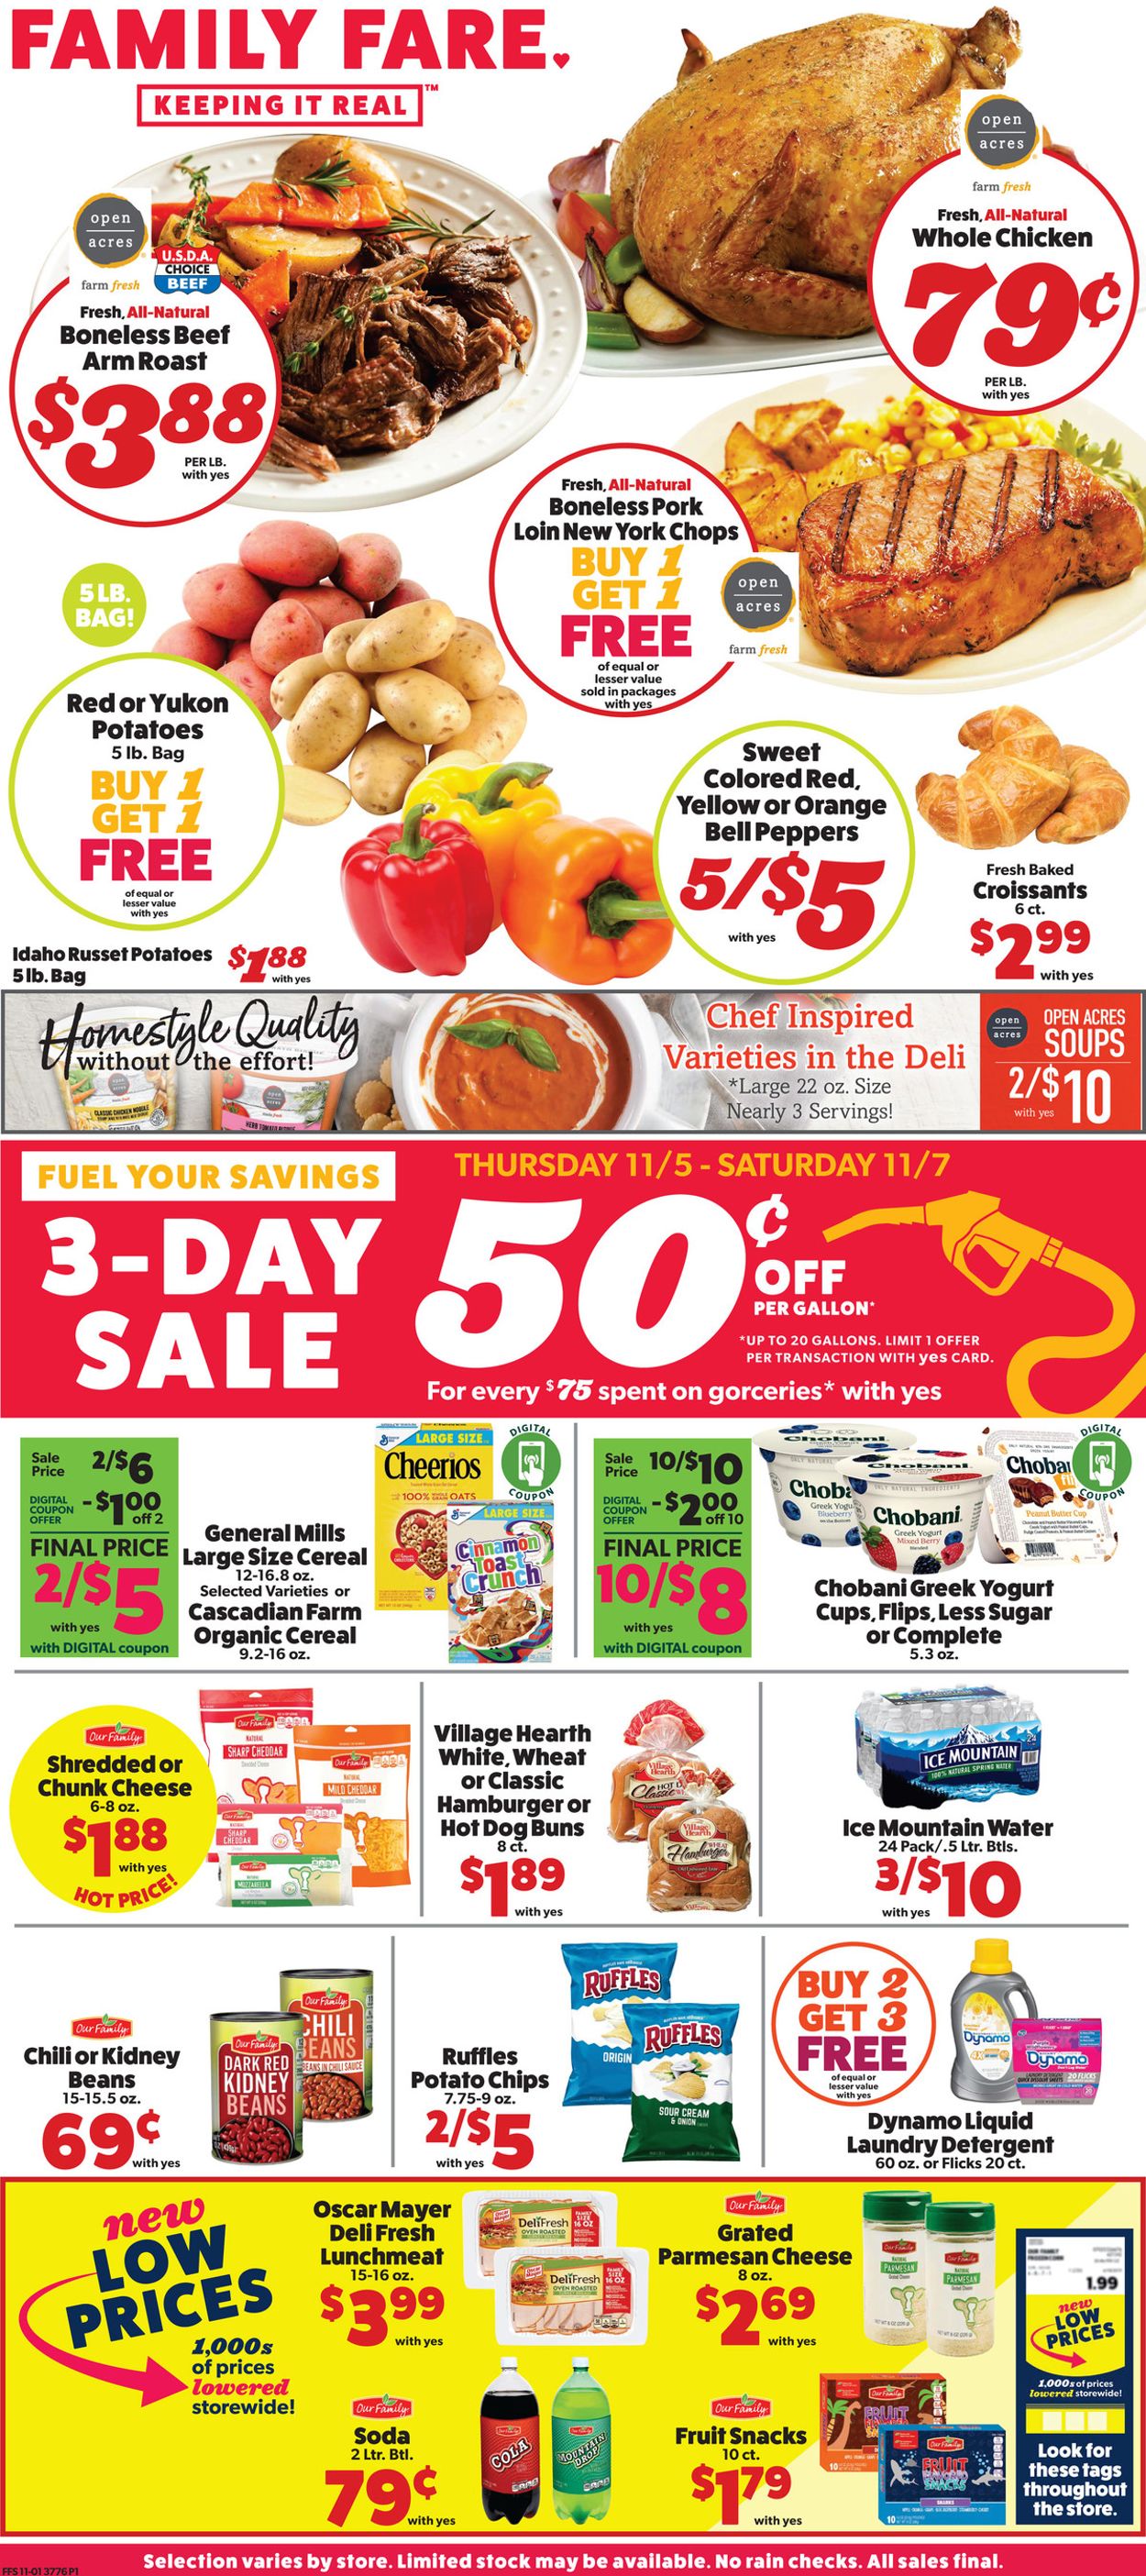 Family Fare Current weekly ad 11/04 - 11/10/2020 - frequent-ads.com